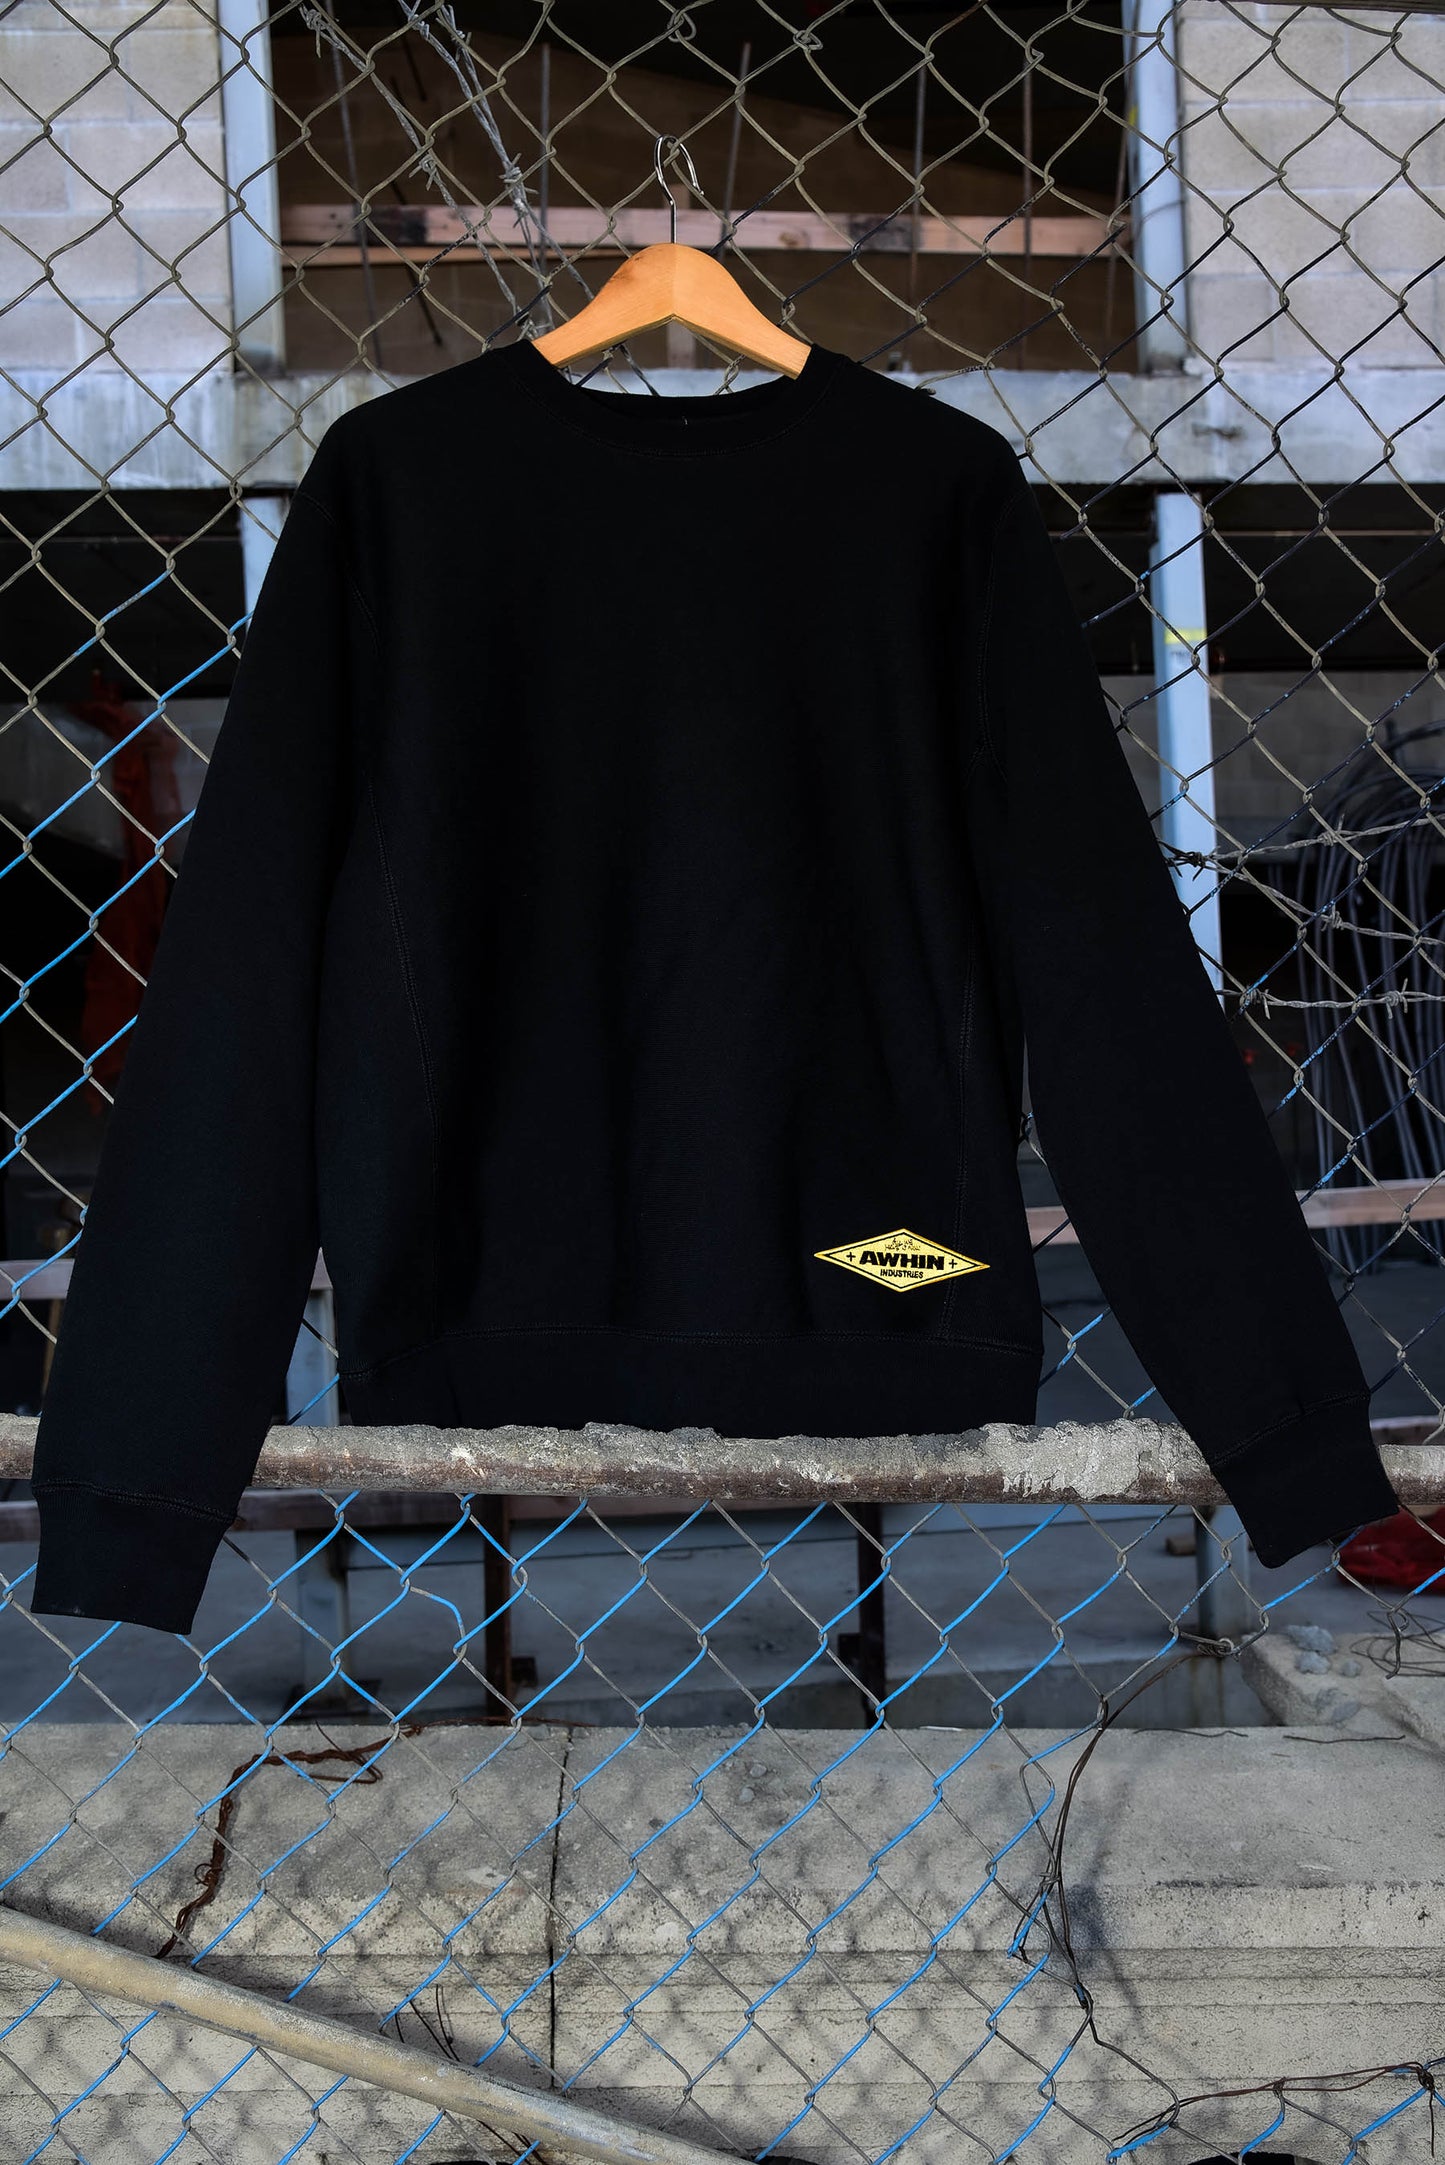 All We Have Is Now Crewneck